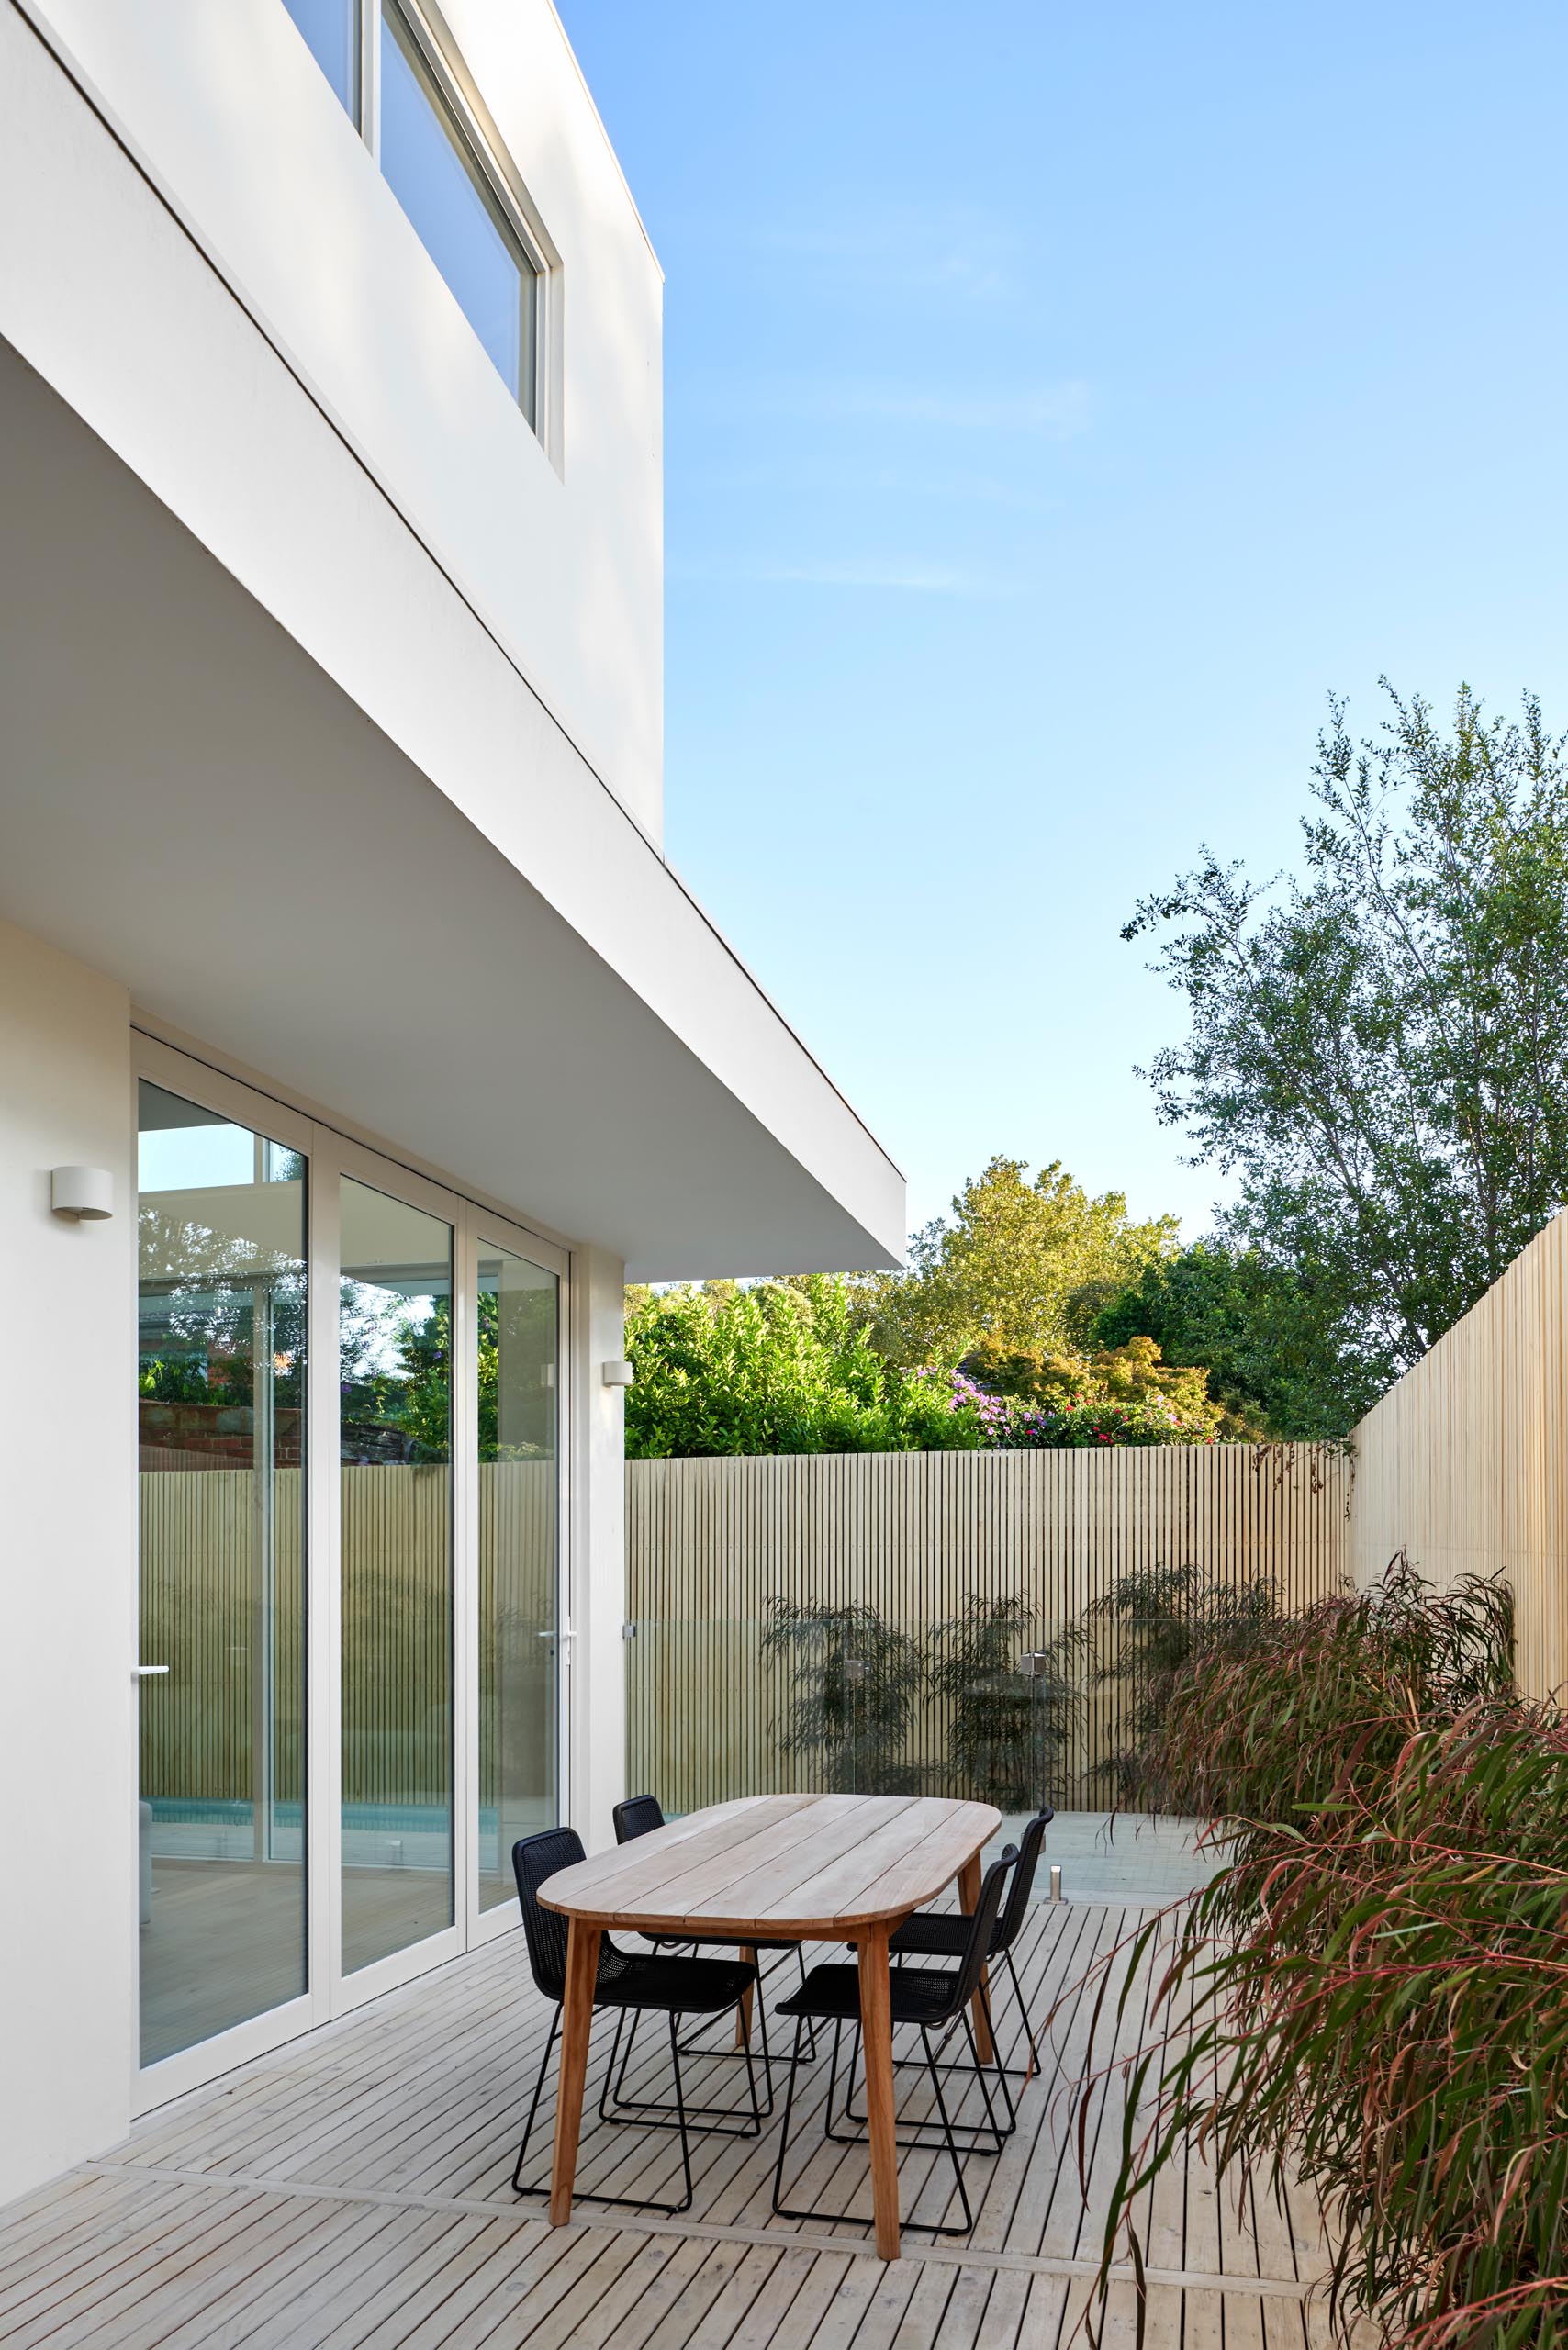 A modern house with a patio for outdoor dining.